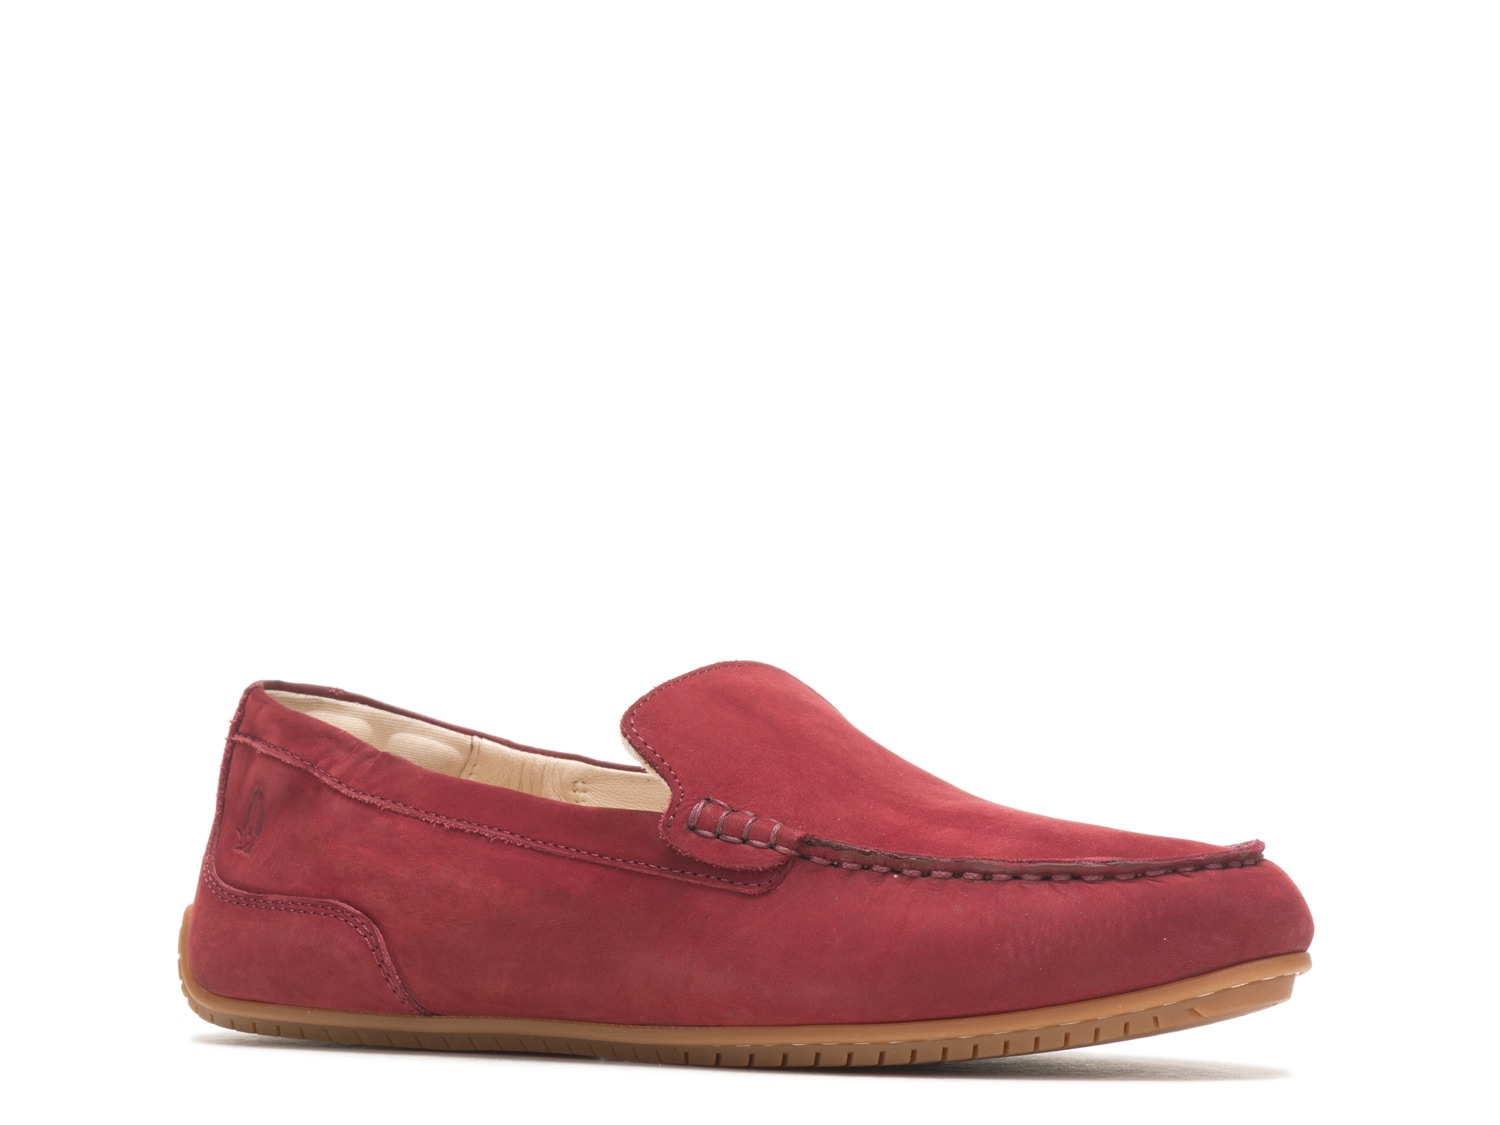 Hush Puppies Cora Loafer - Free Shipping | DSW